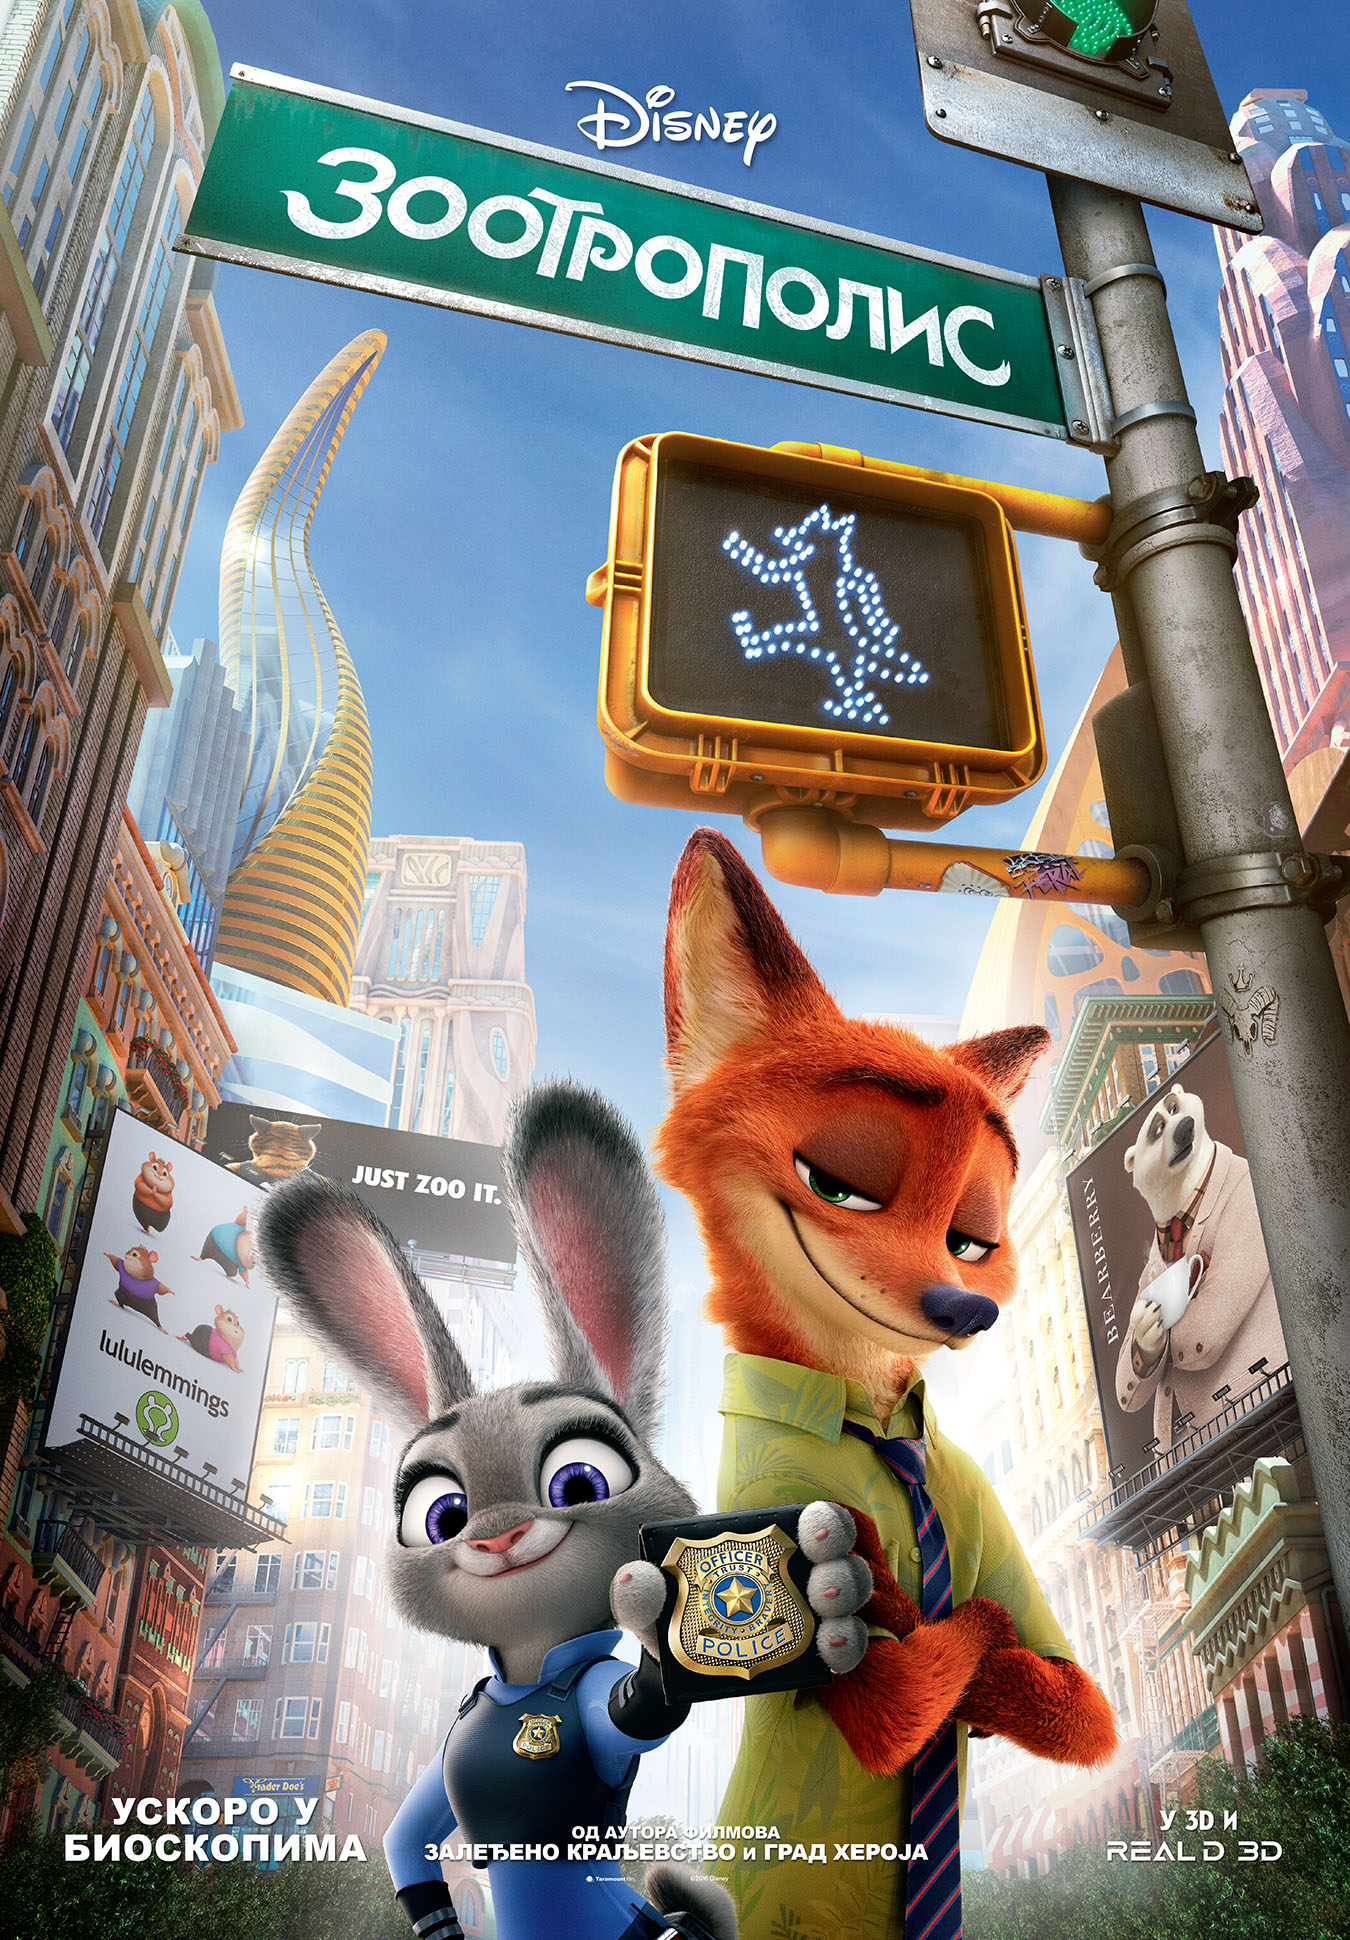 Kelwick the Donkey on X: The Zootopia 2 movie posters look great!   / X